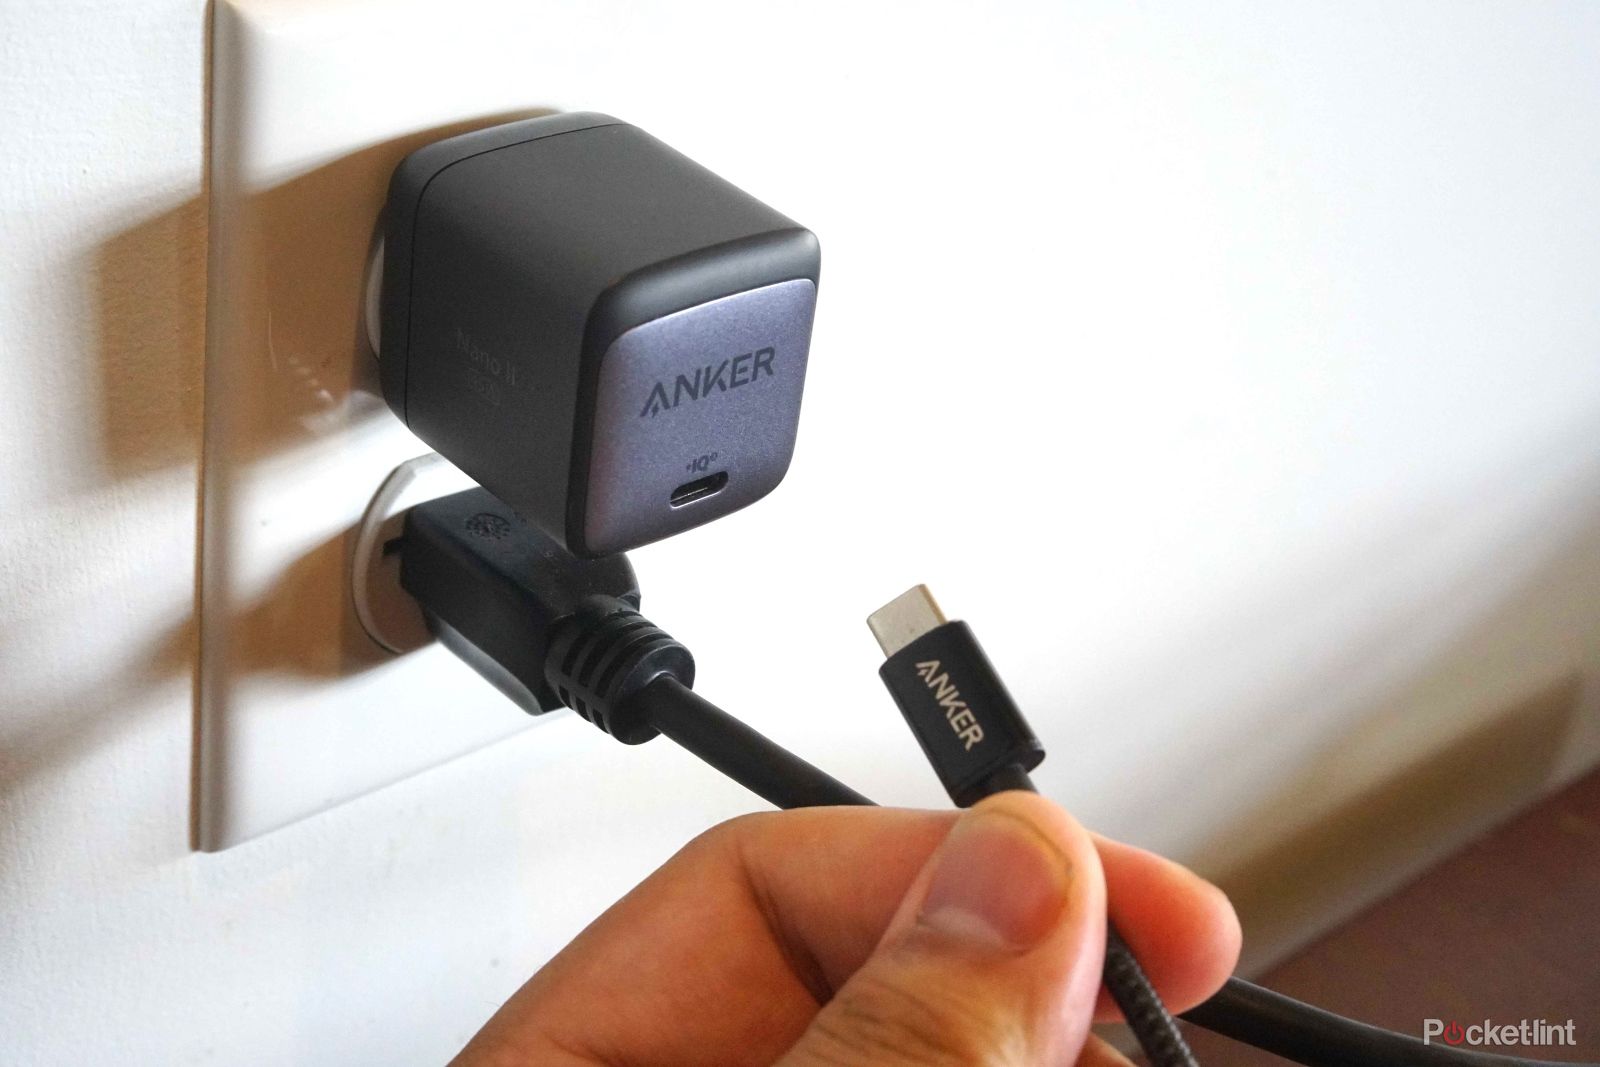 best-usb-phone-charger:-your-new-iphone-or-android needs-an-upgraded-wall-adapter